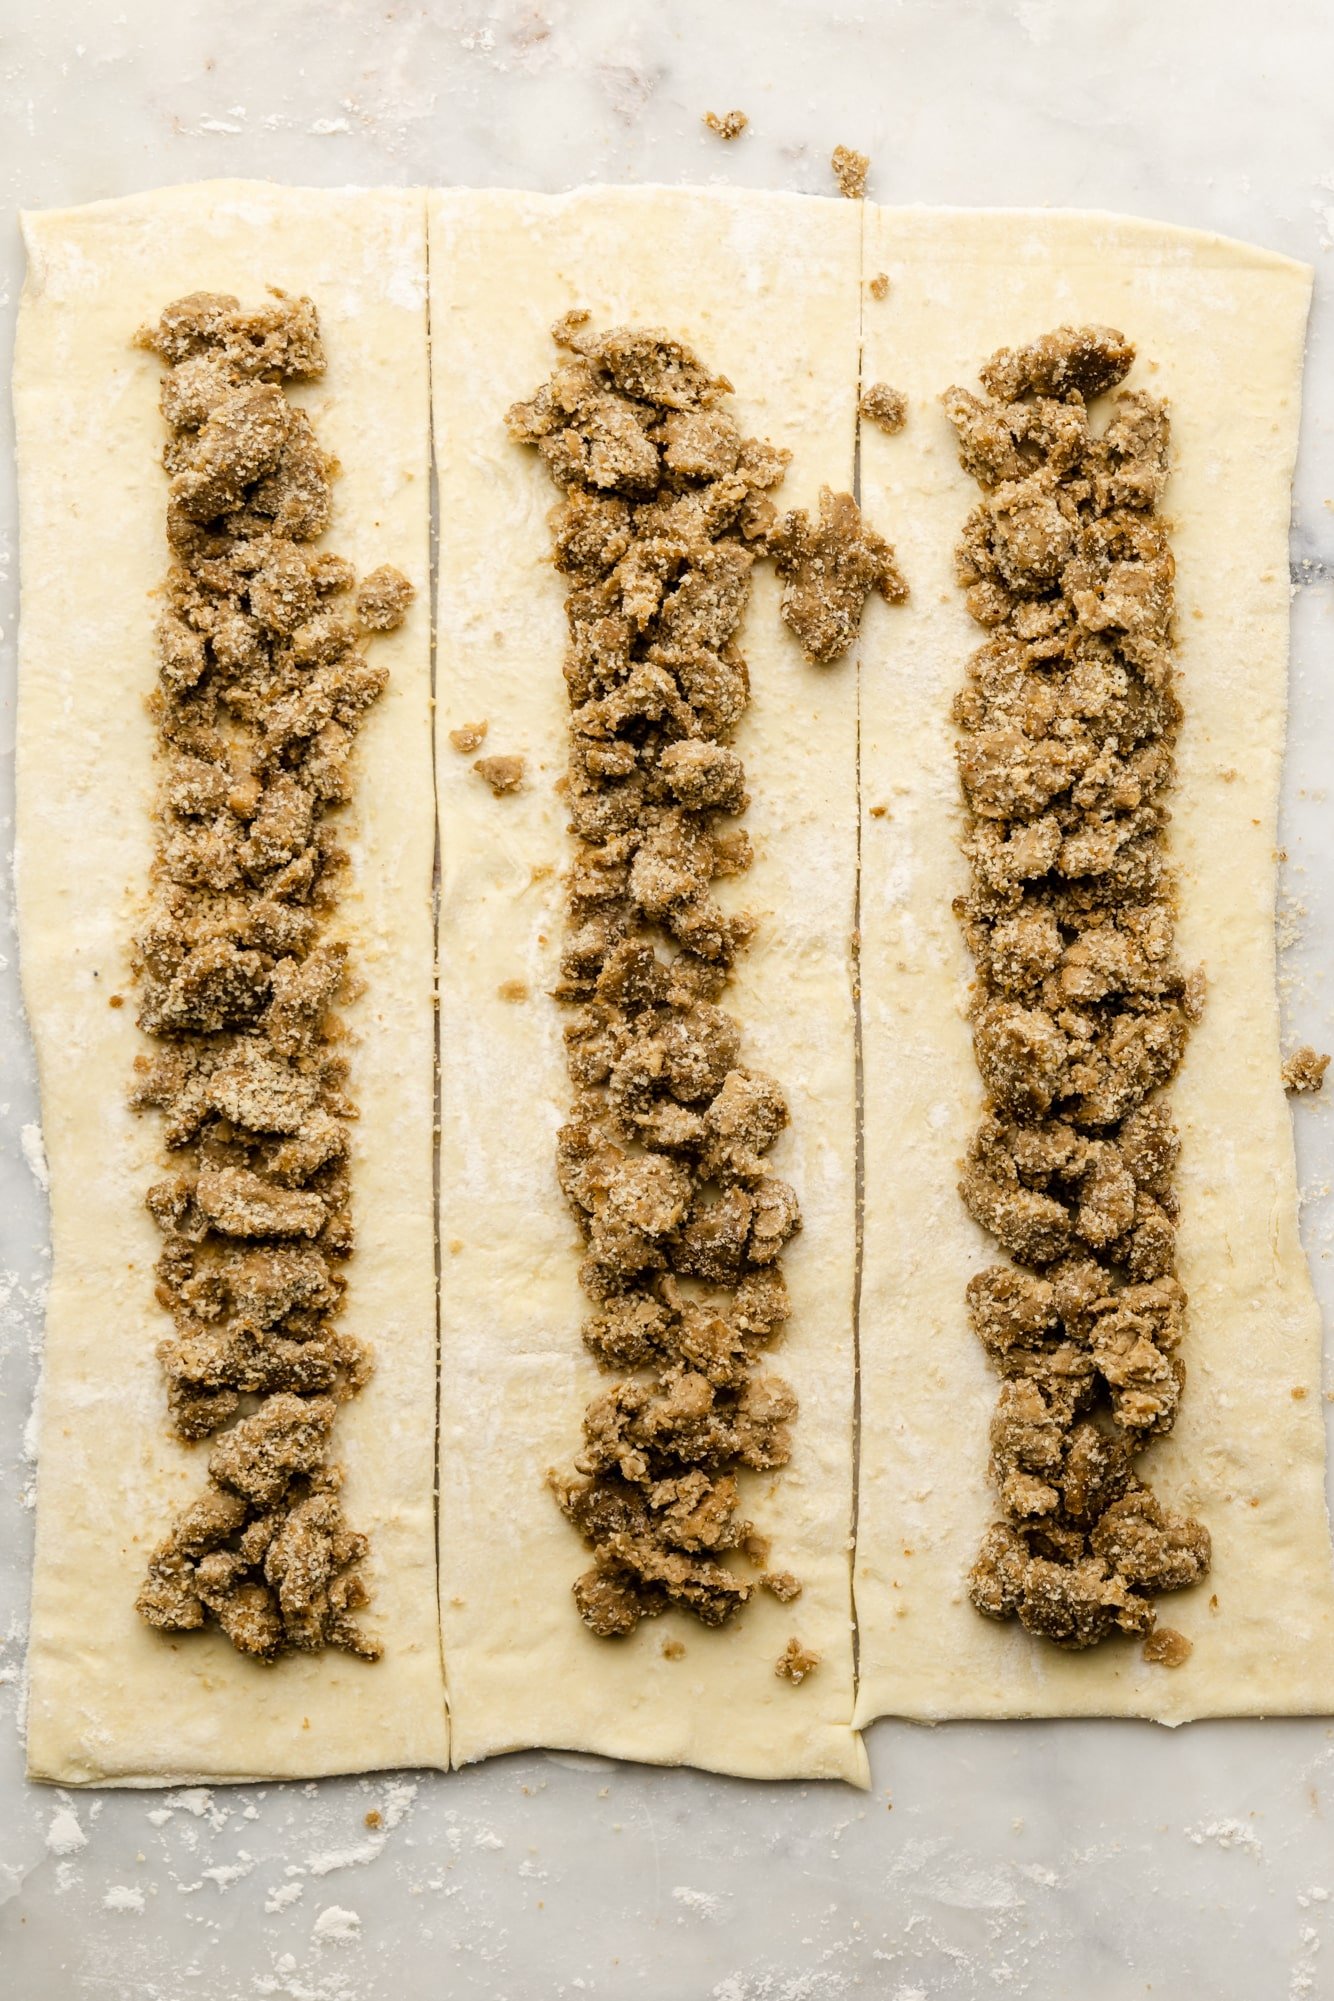 vegan sausage crumbles in rows on sheets of puff pastry.